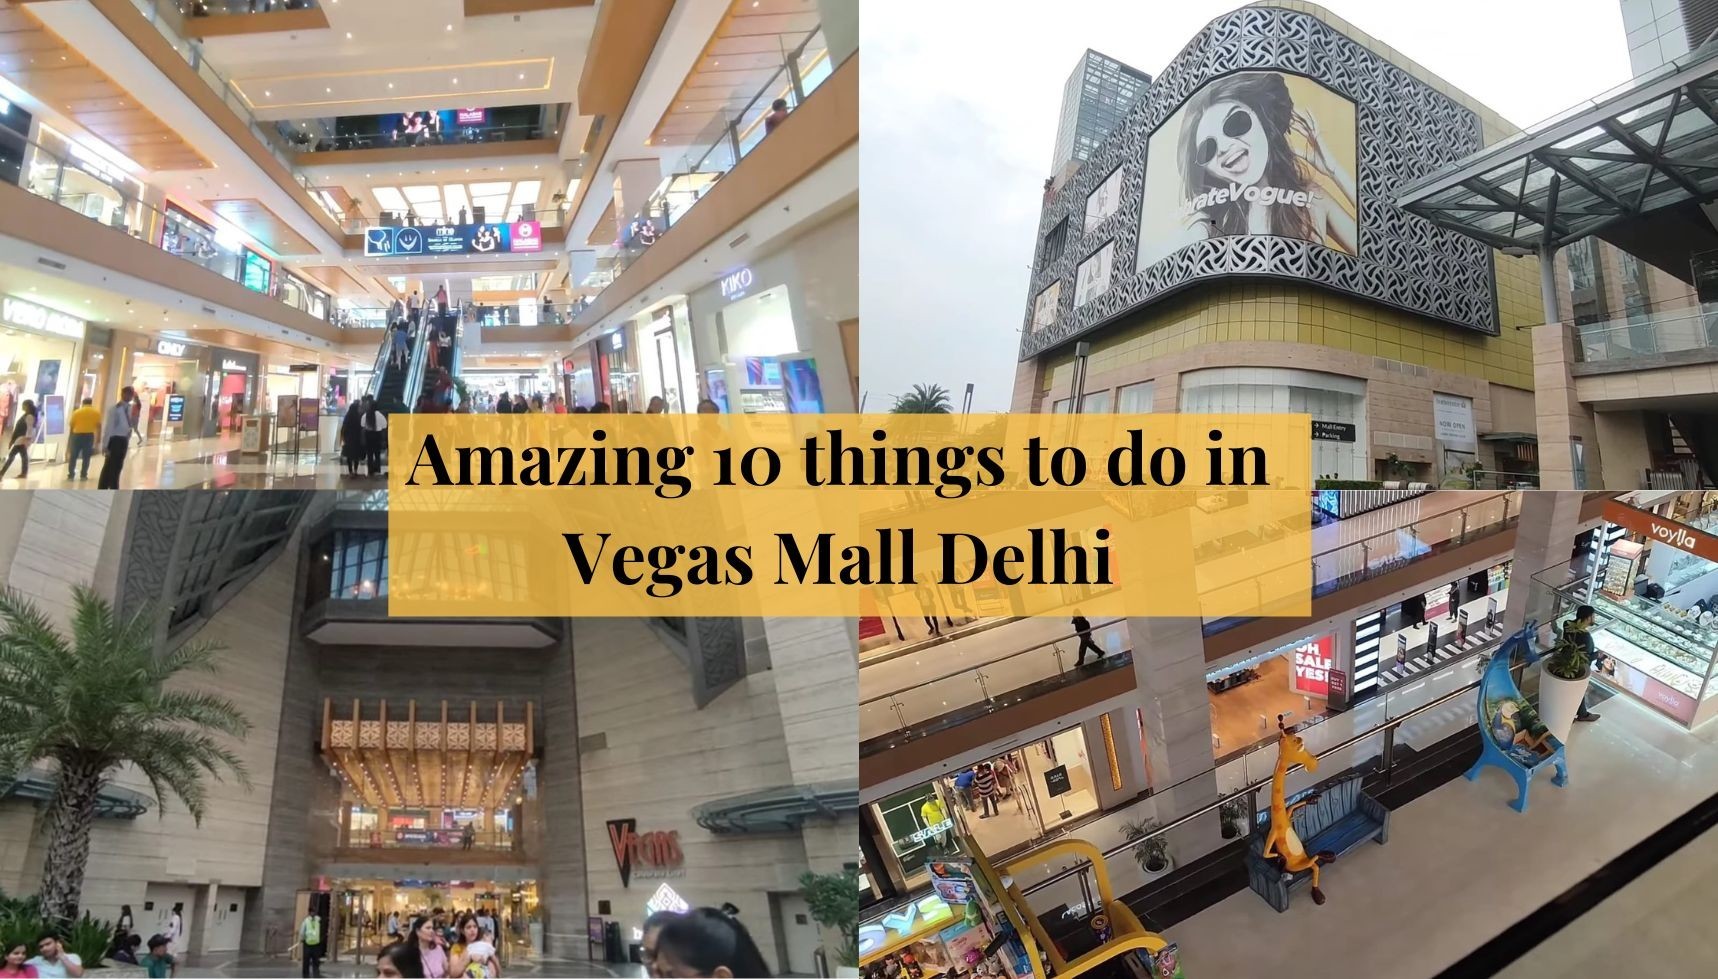 Discover the Top 10 Attractions at Vegas Mall Delhi